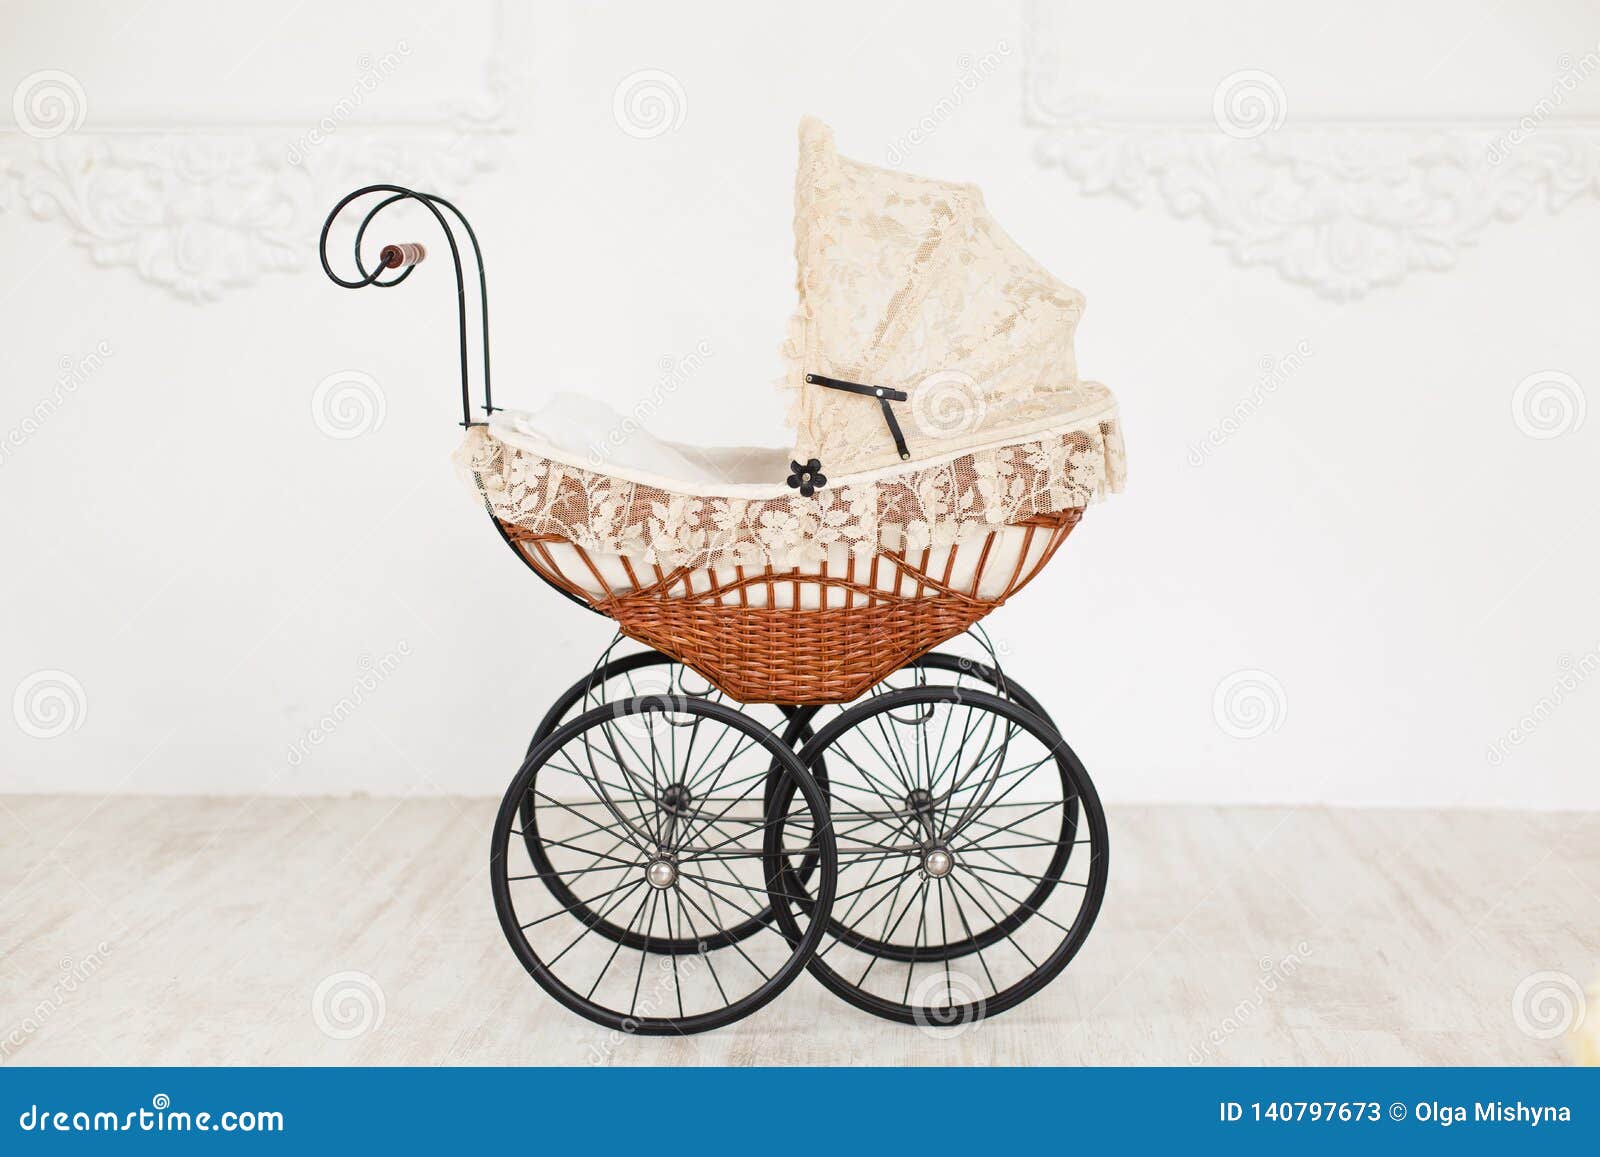 baby buggy vintage